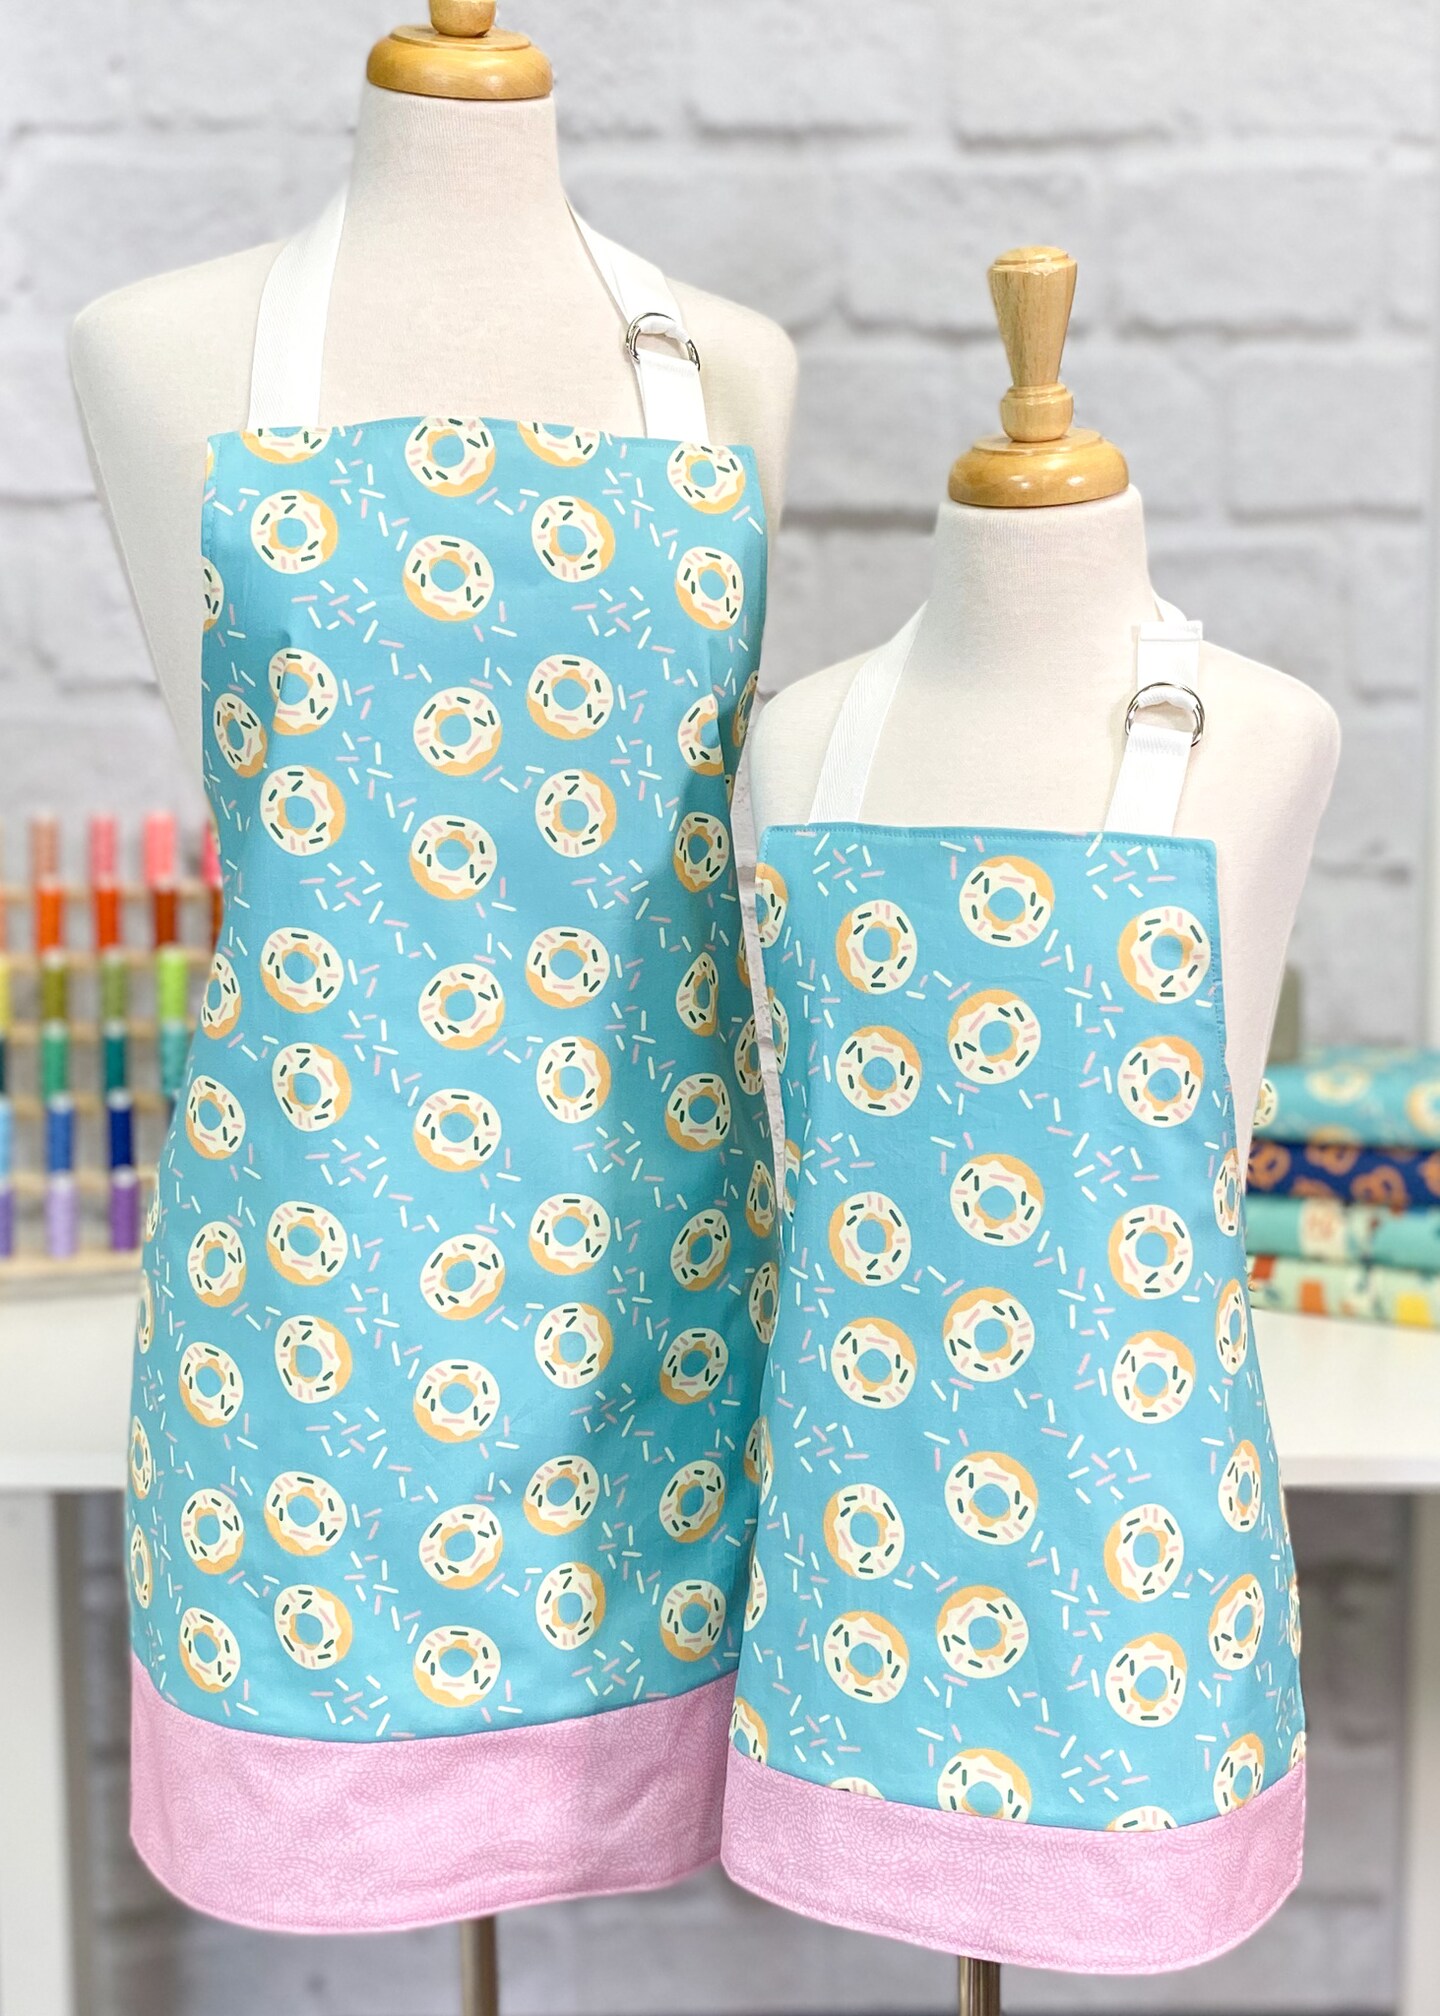 Apron Sewing Kit - Donuts - DIY Sewing Kit for Beginners